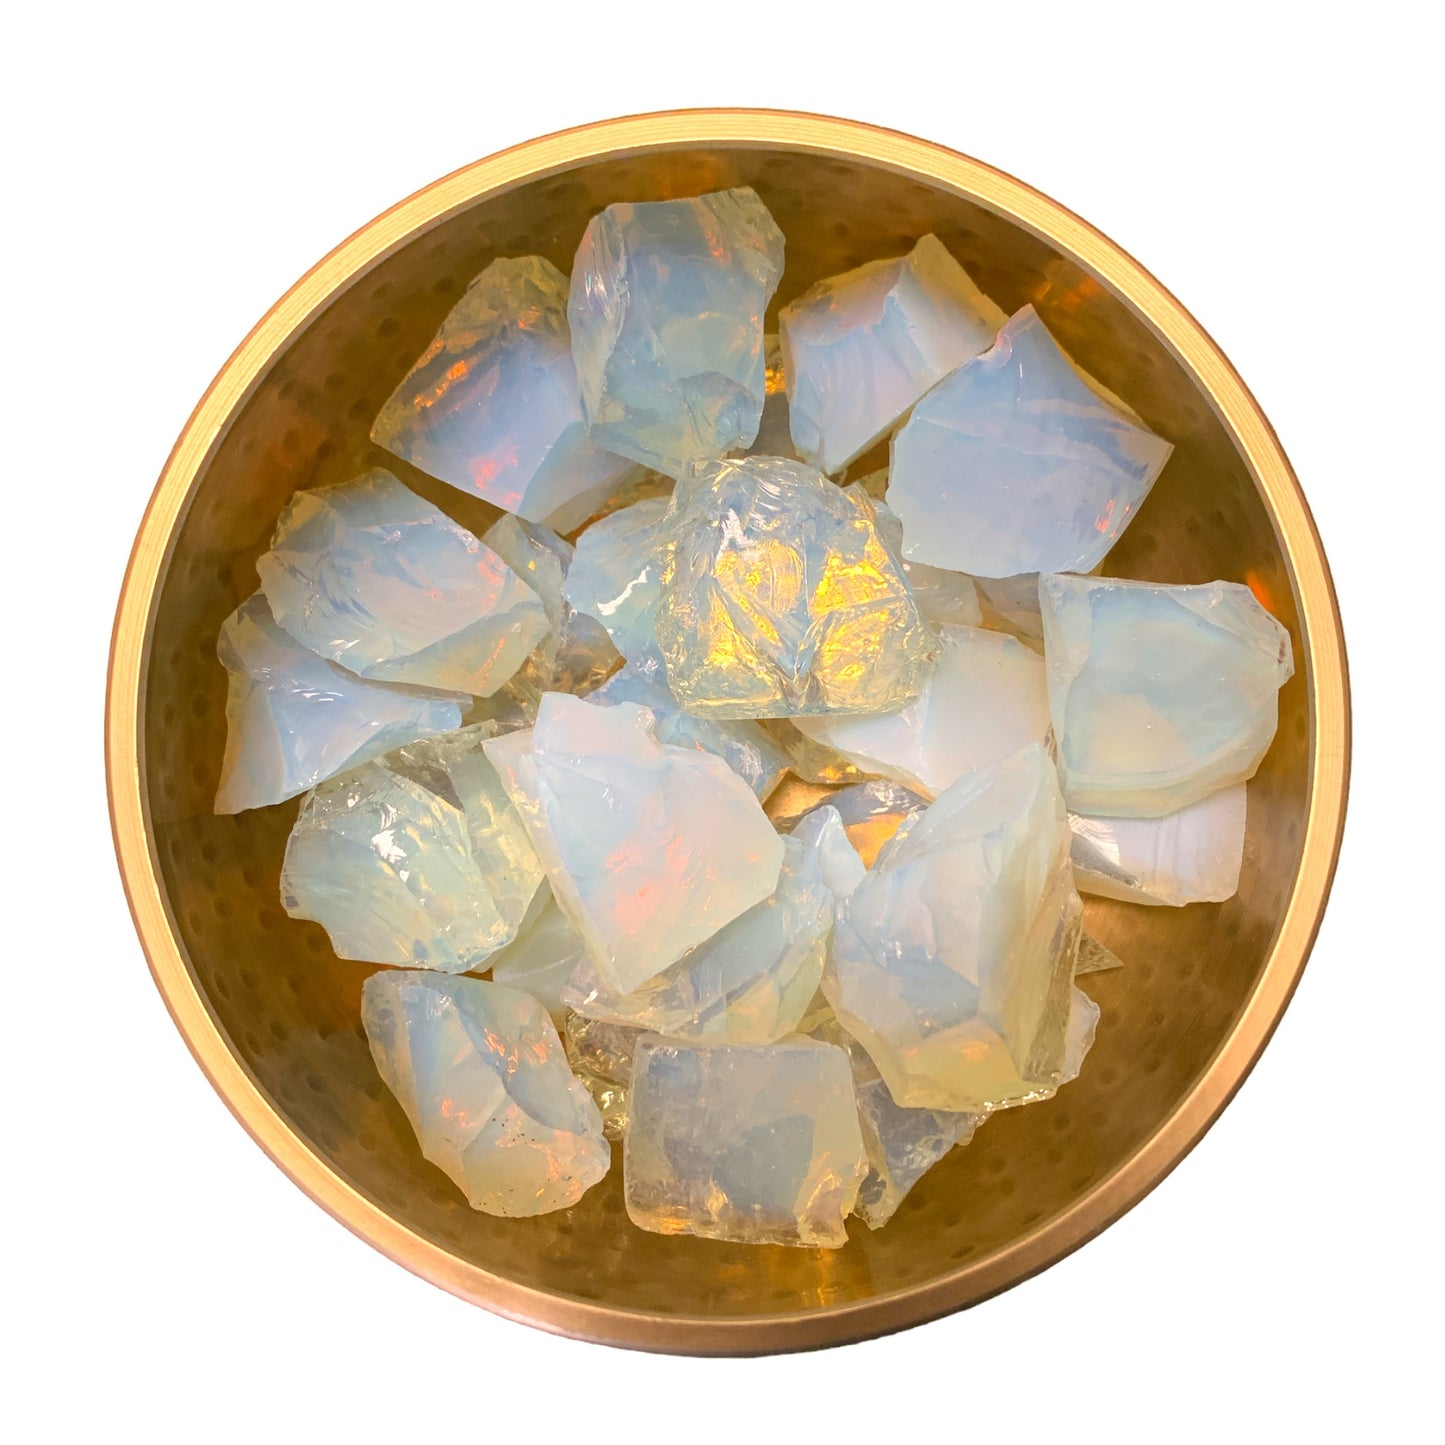 Opalite Raw Synthetic Stone - 4-6 cm Assorted Sizes - Sold by the kilo - China - NEW423